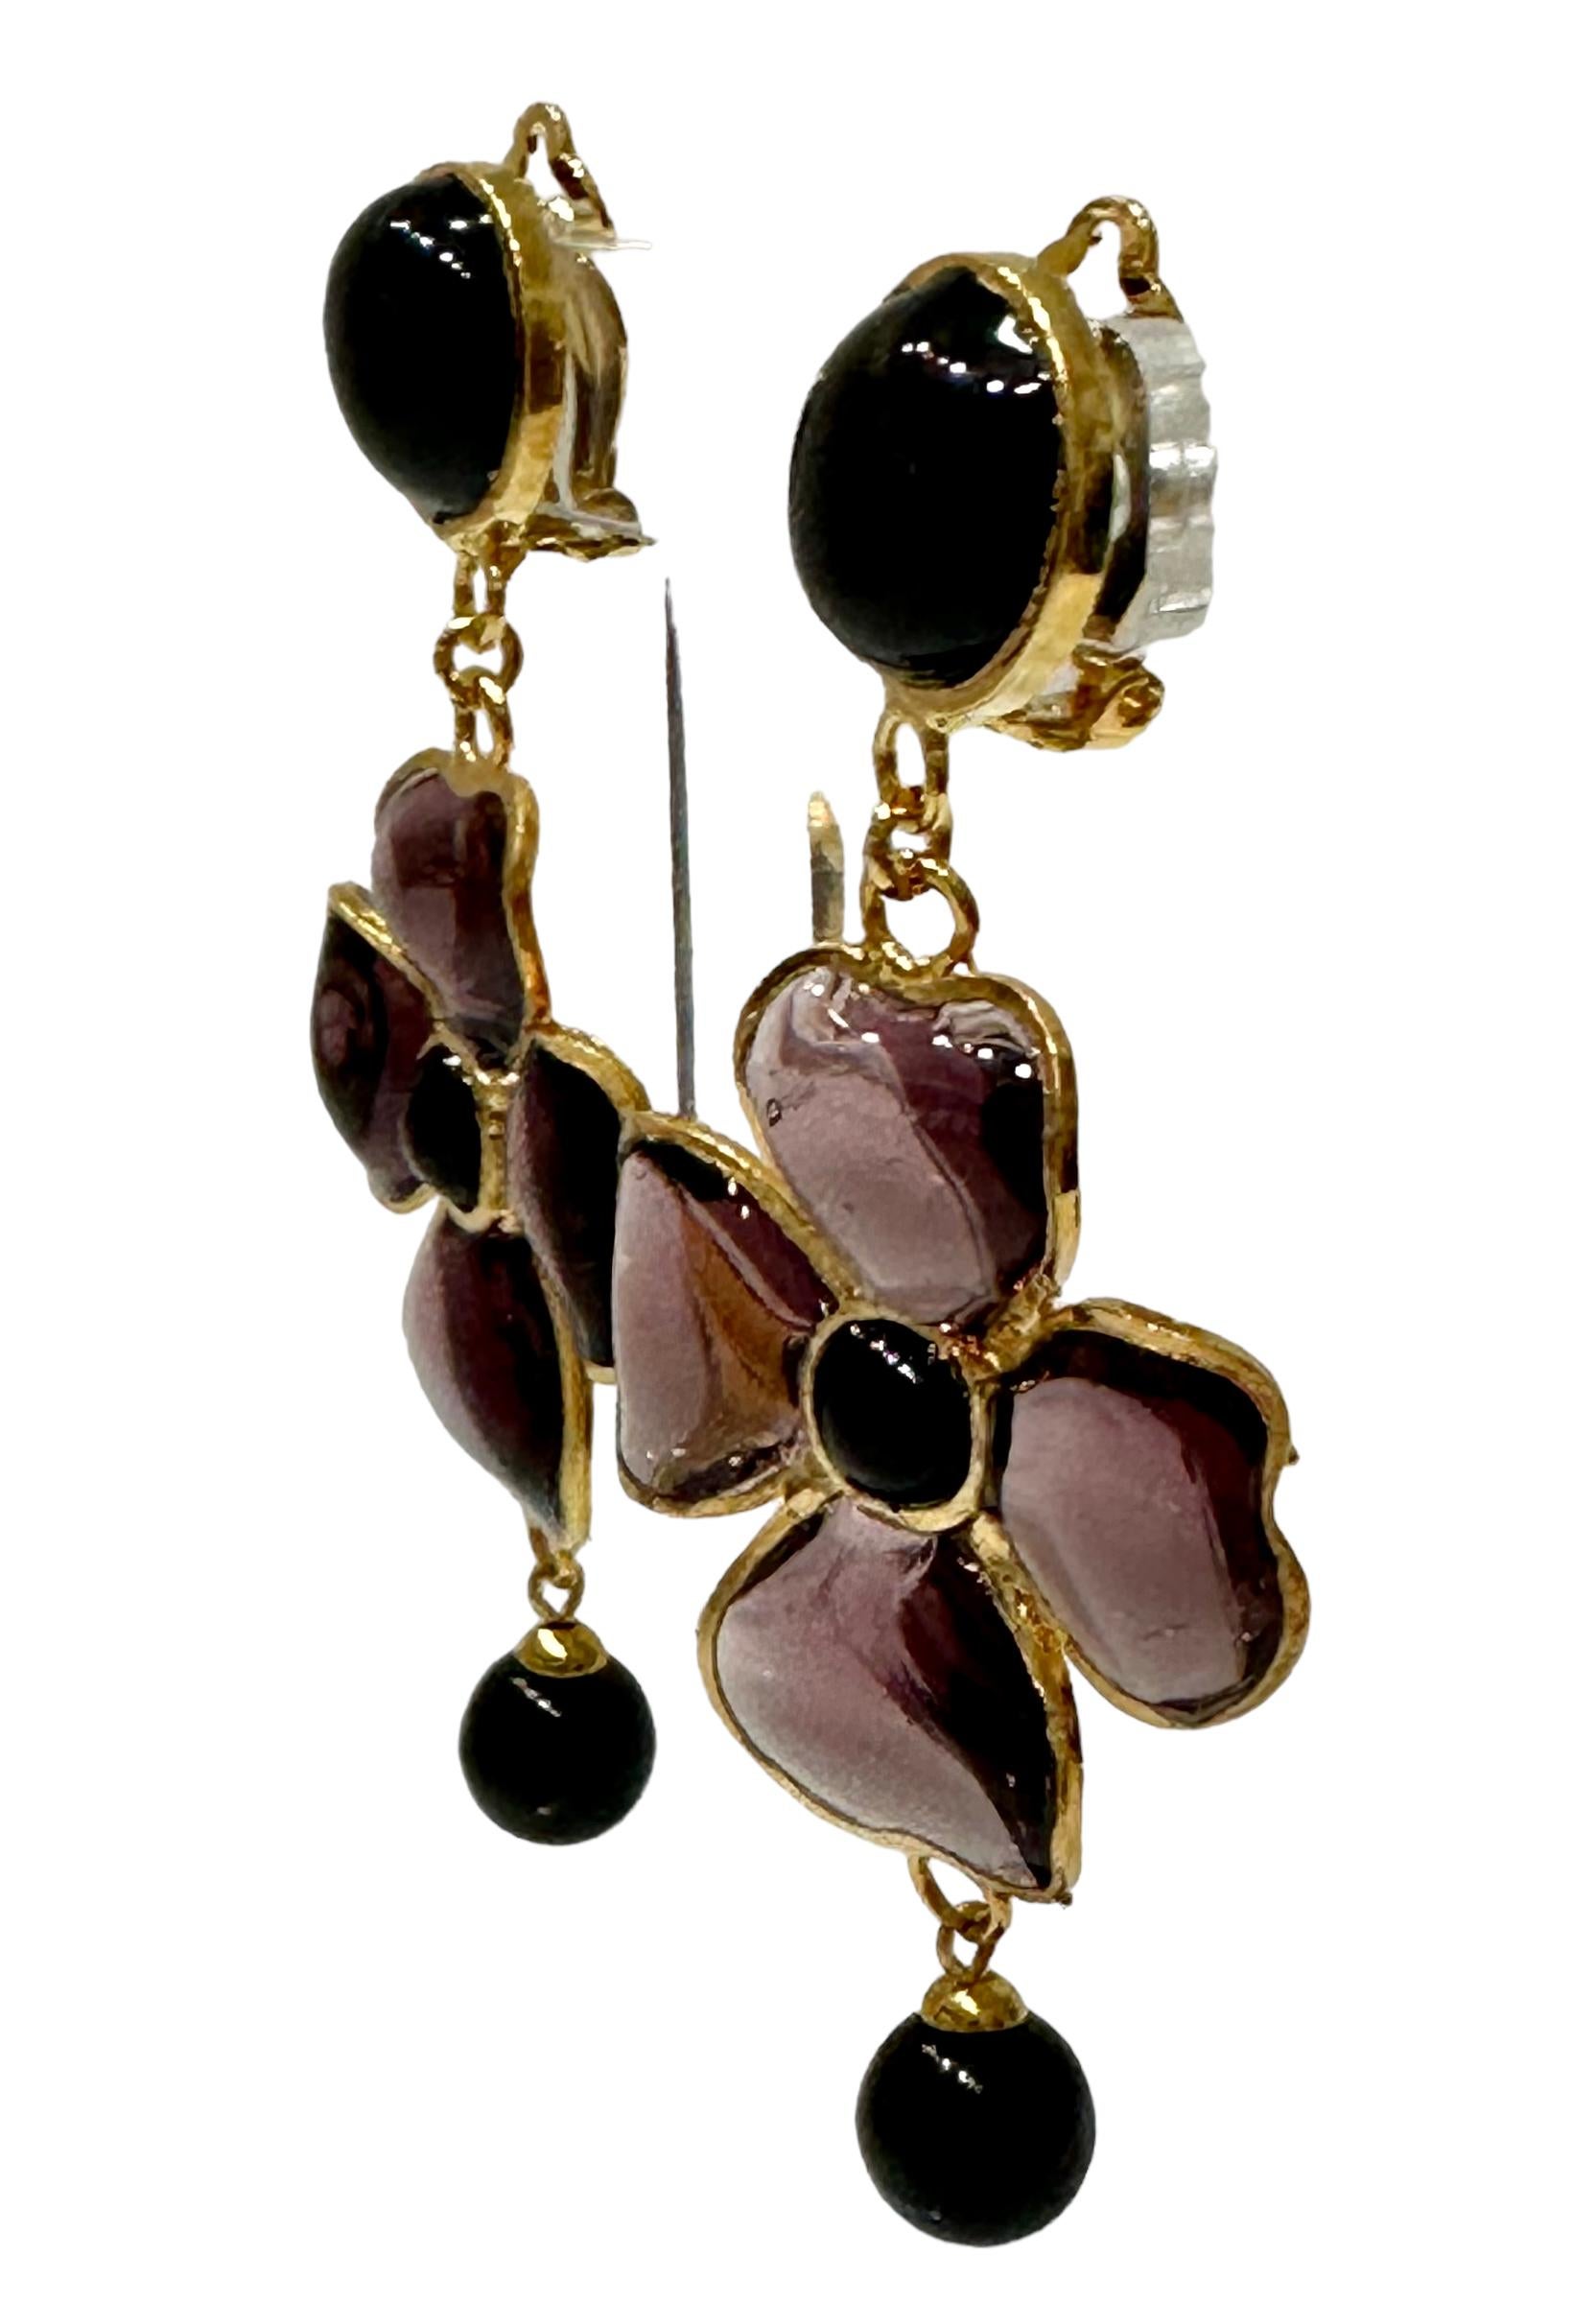 Design by Françoise Montague. Gripoix work by former artisans of the atelier. Clip earrings Gripoix work ( famed pate de verre  for the House of Chanel) was used for these clover drop earrings. Poured glass in purple  and black ,gilded brass 
Clip